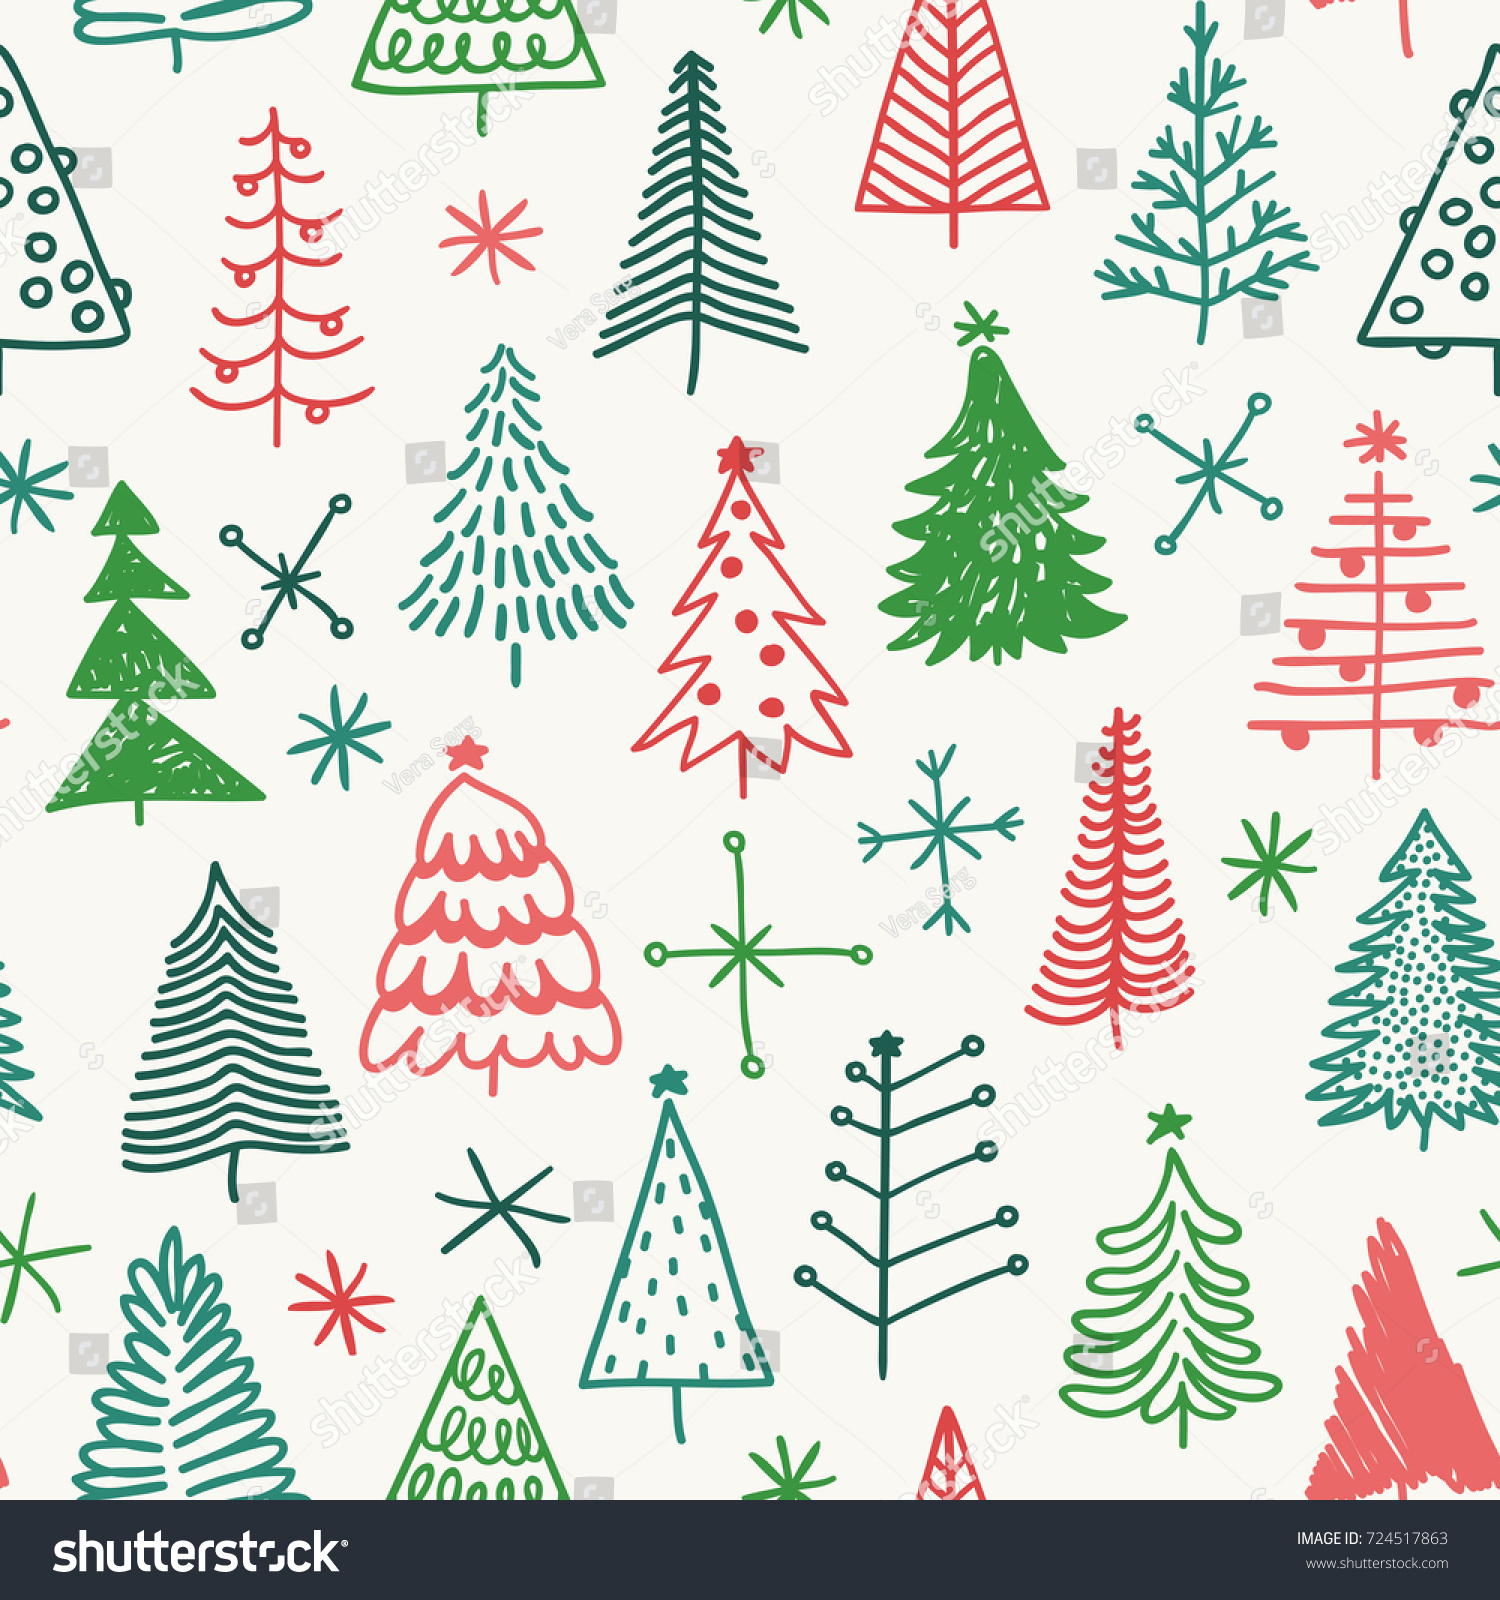 Seamless pattern with hand drawn Christmas tree Abstract doodle drawing winter wood Vector art